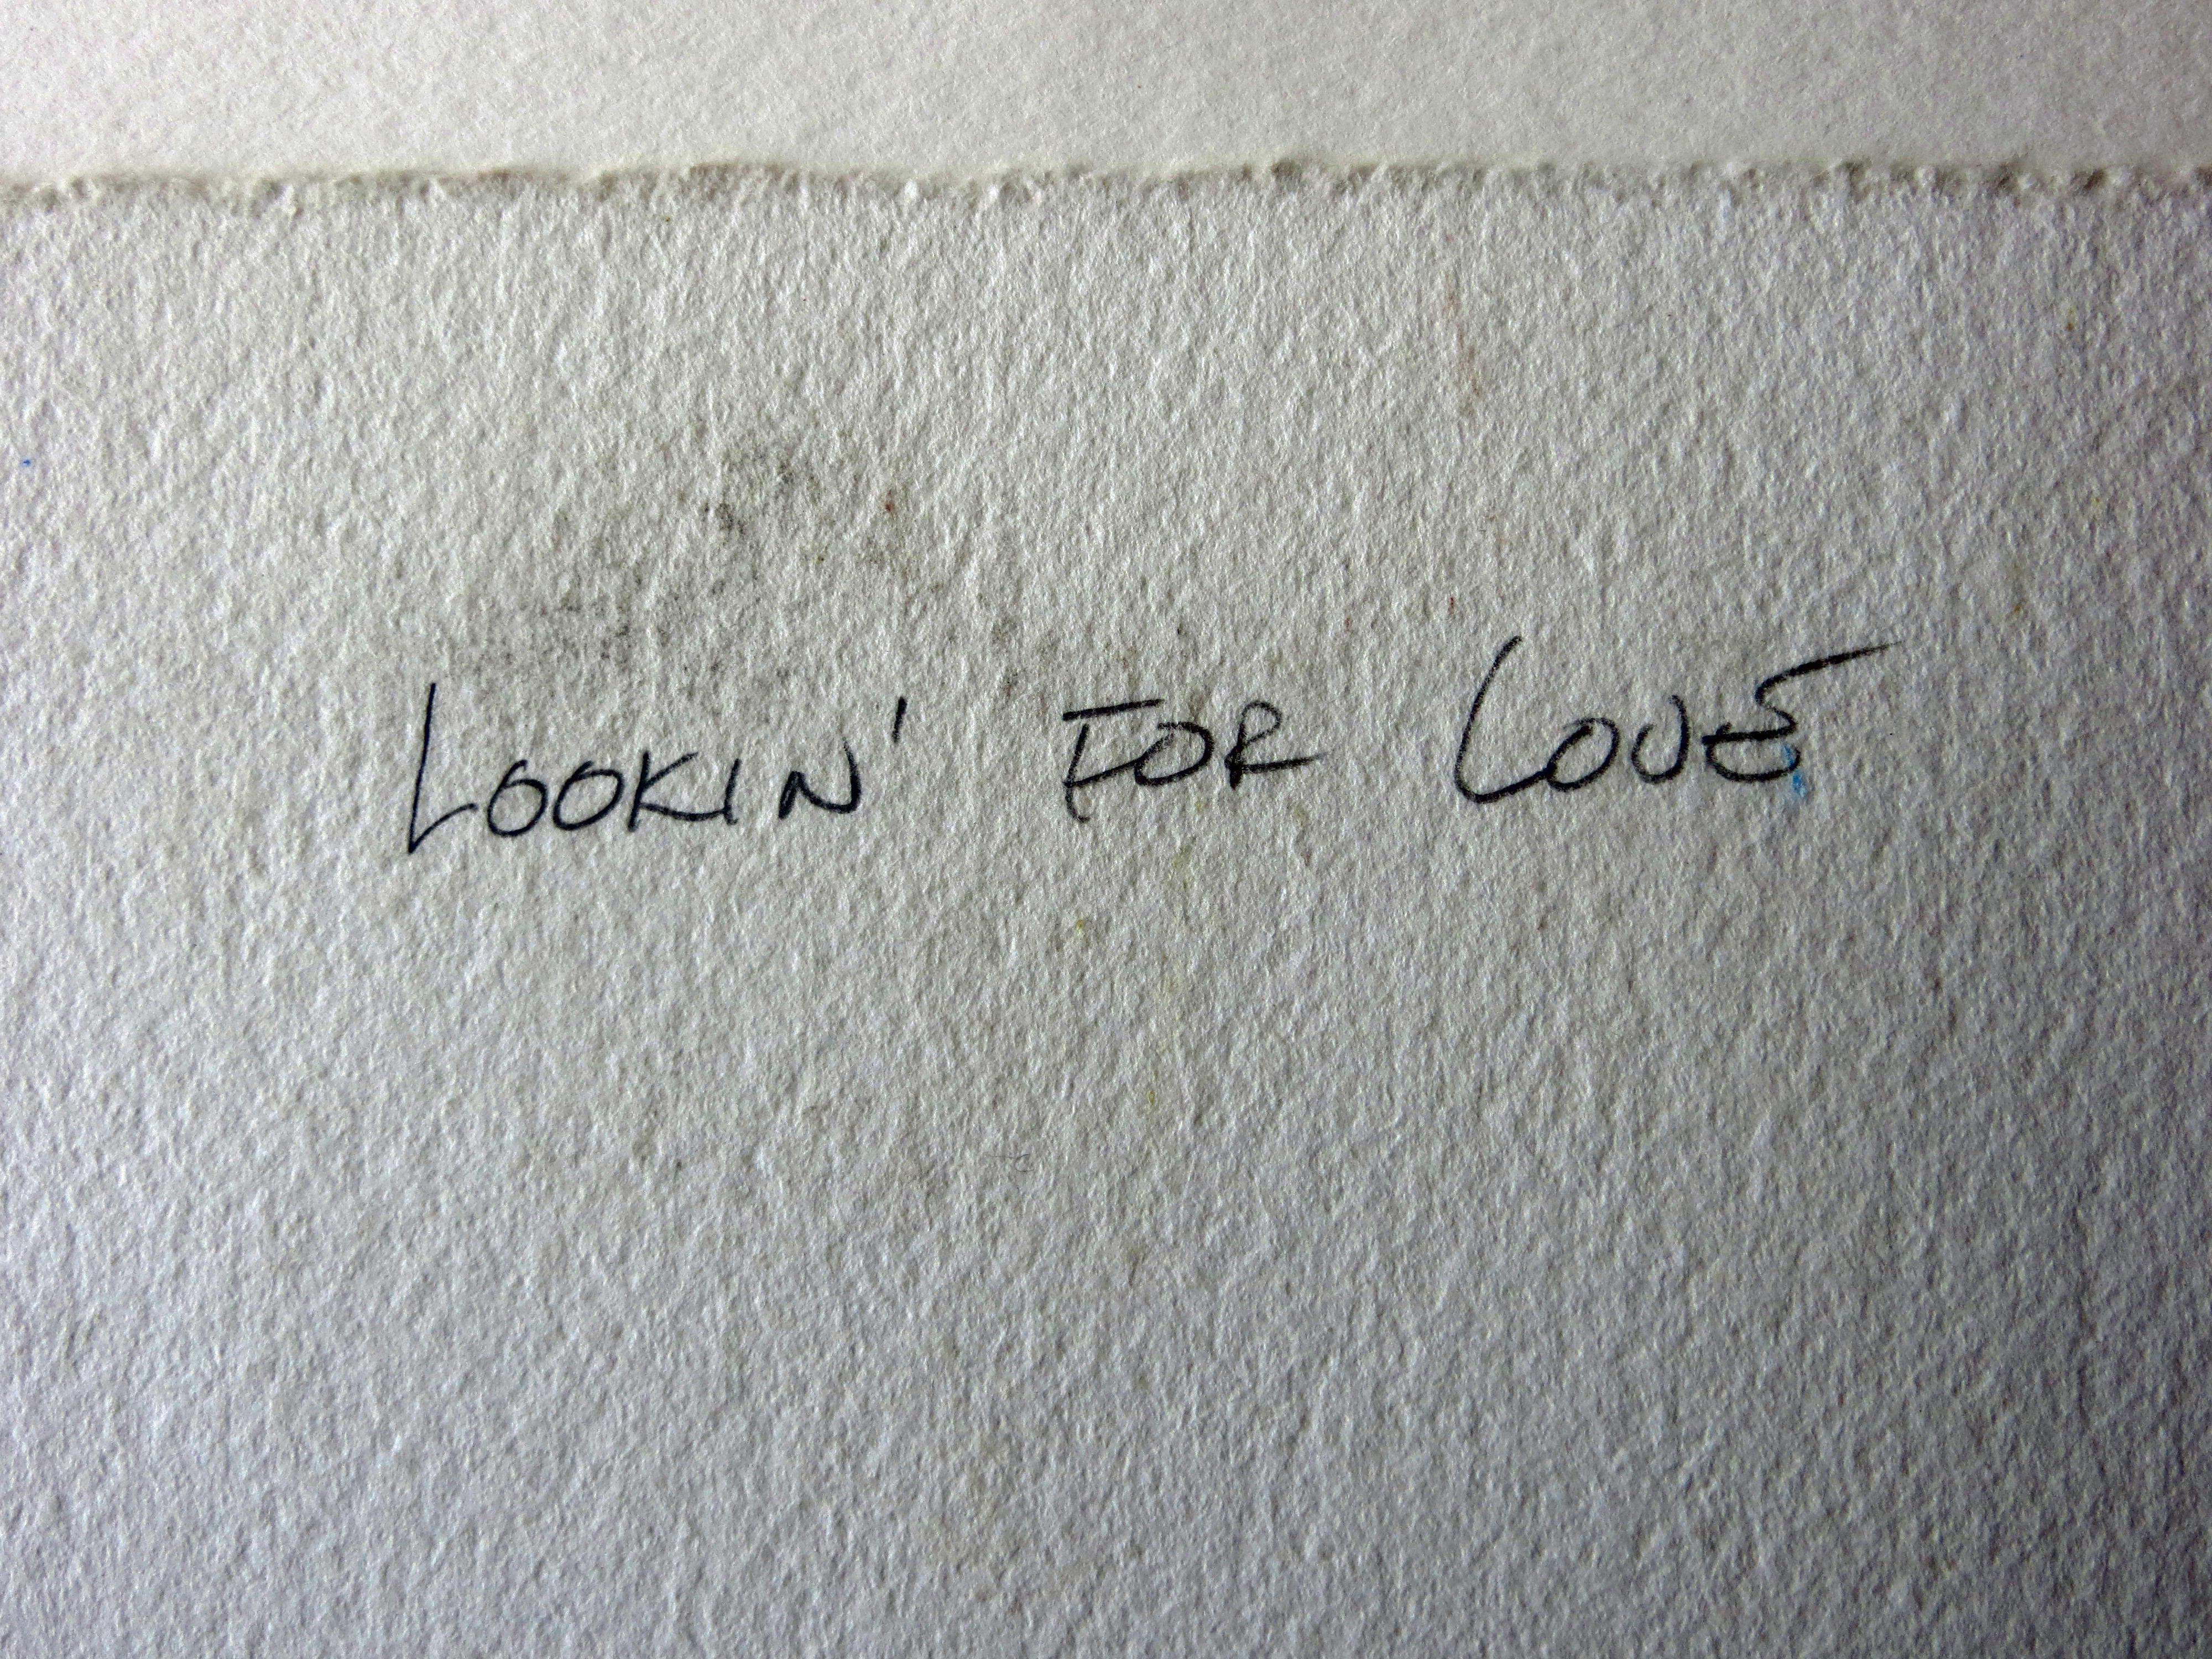 Lookin' for Love - Realist Painting by Bob Barkell